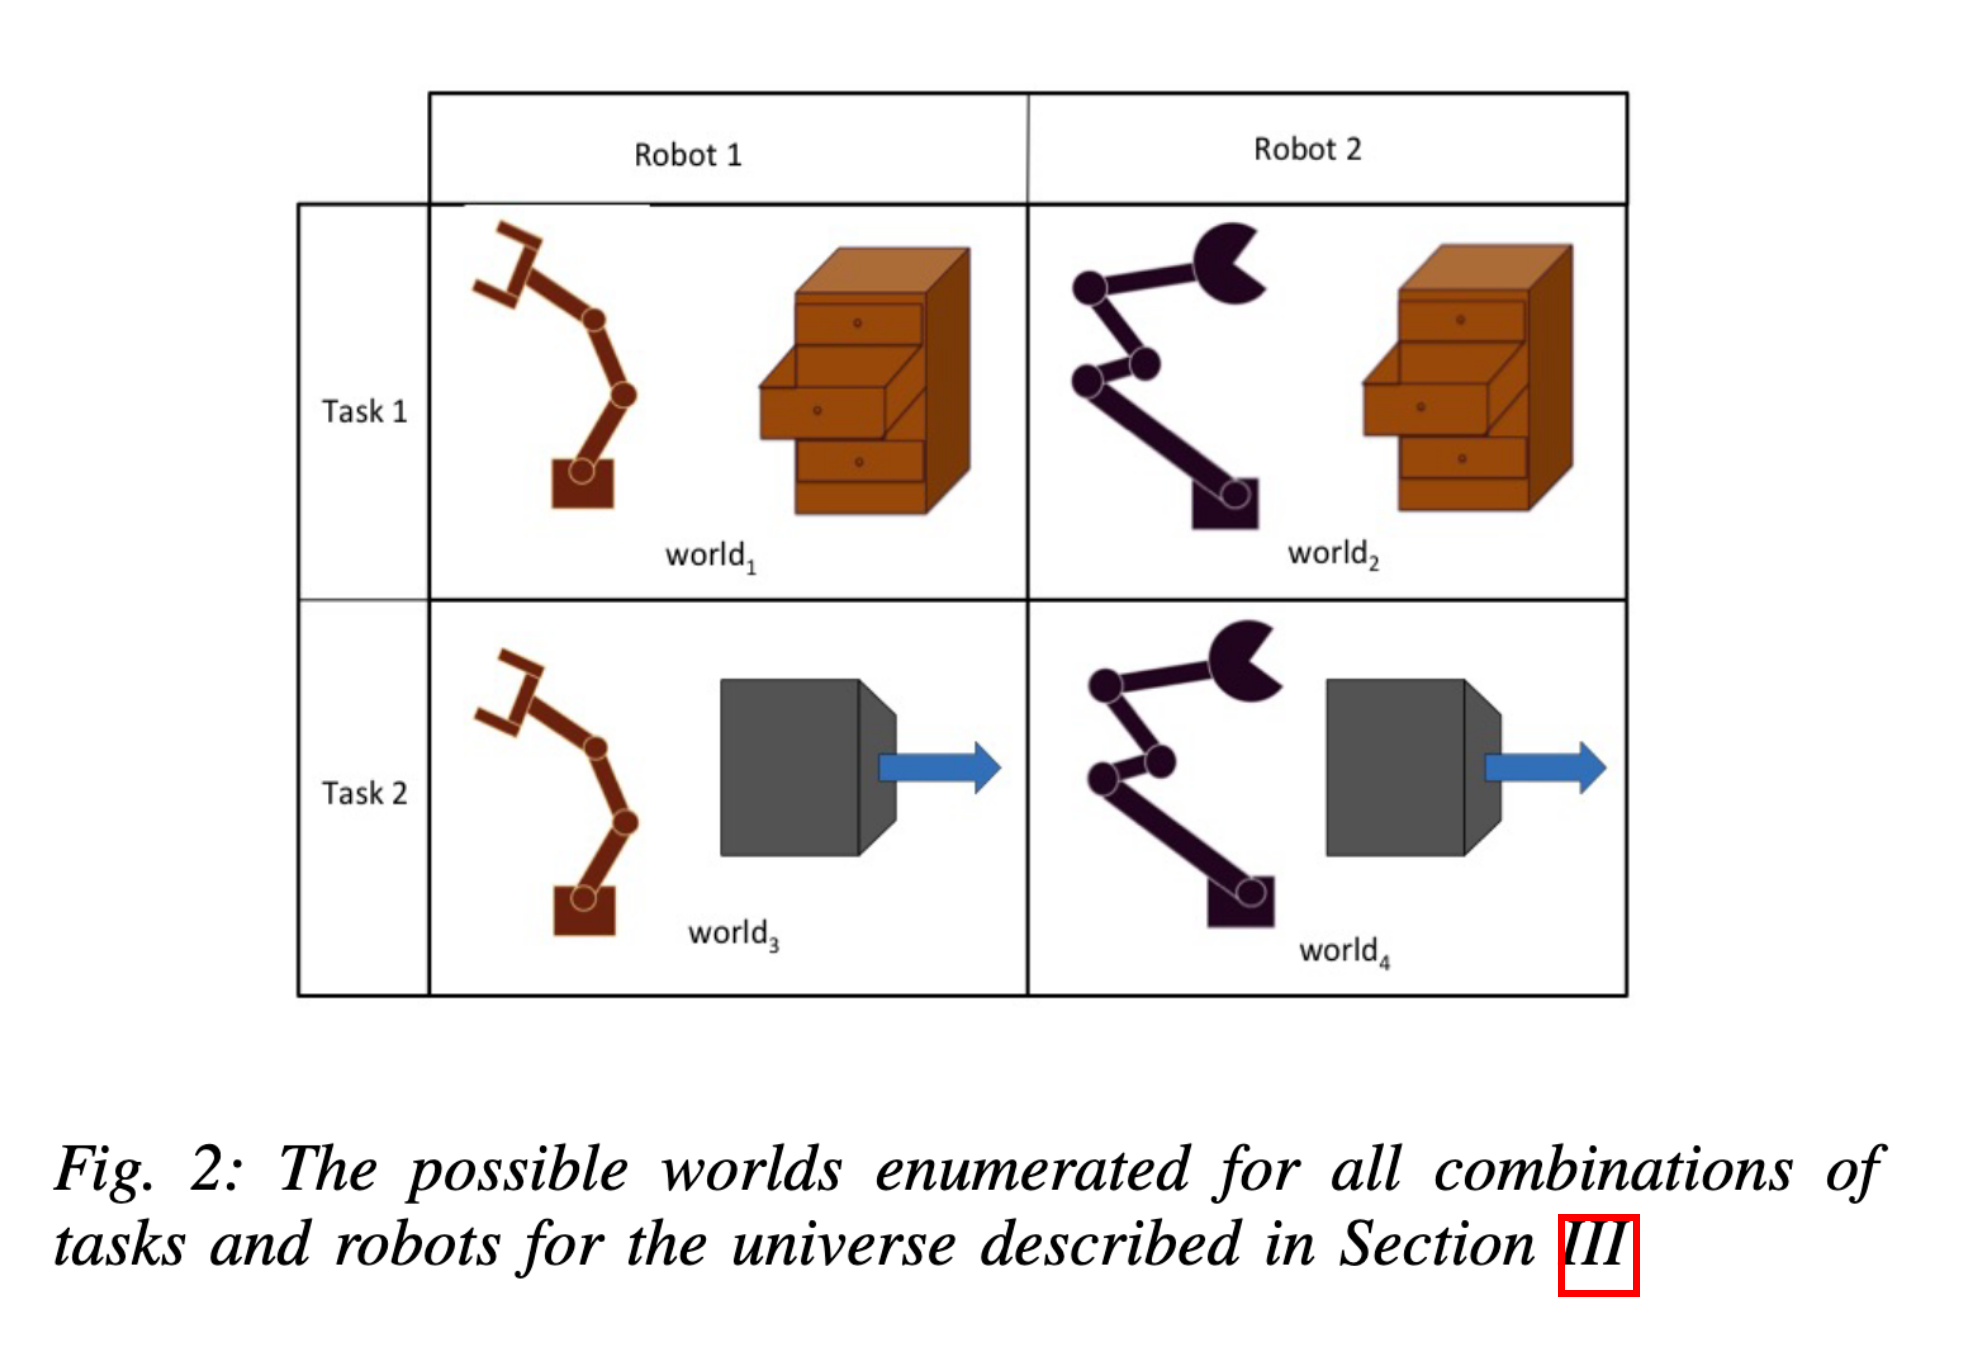 The robot and task networks are trained end-to-end on different robot-task combinations, with some held out. For example, during training this system does not encounter robot 2 combined with task 2, but does encounter robot 2 and task 2 separately in different situations. At test time, the system has to perform well when robot 2 is combined with task 2.